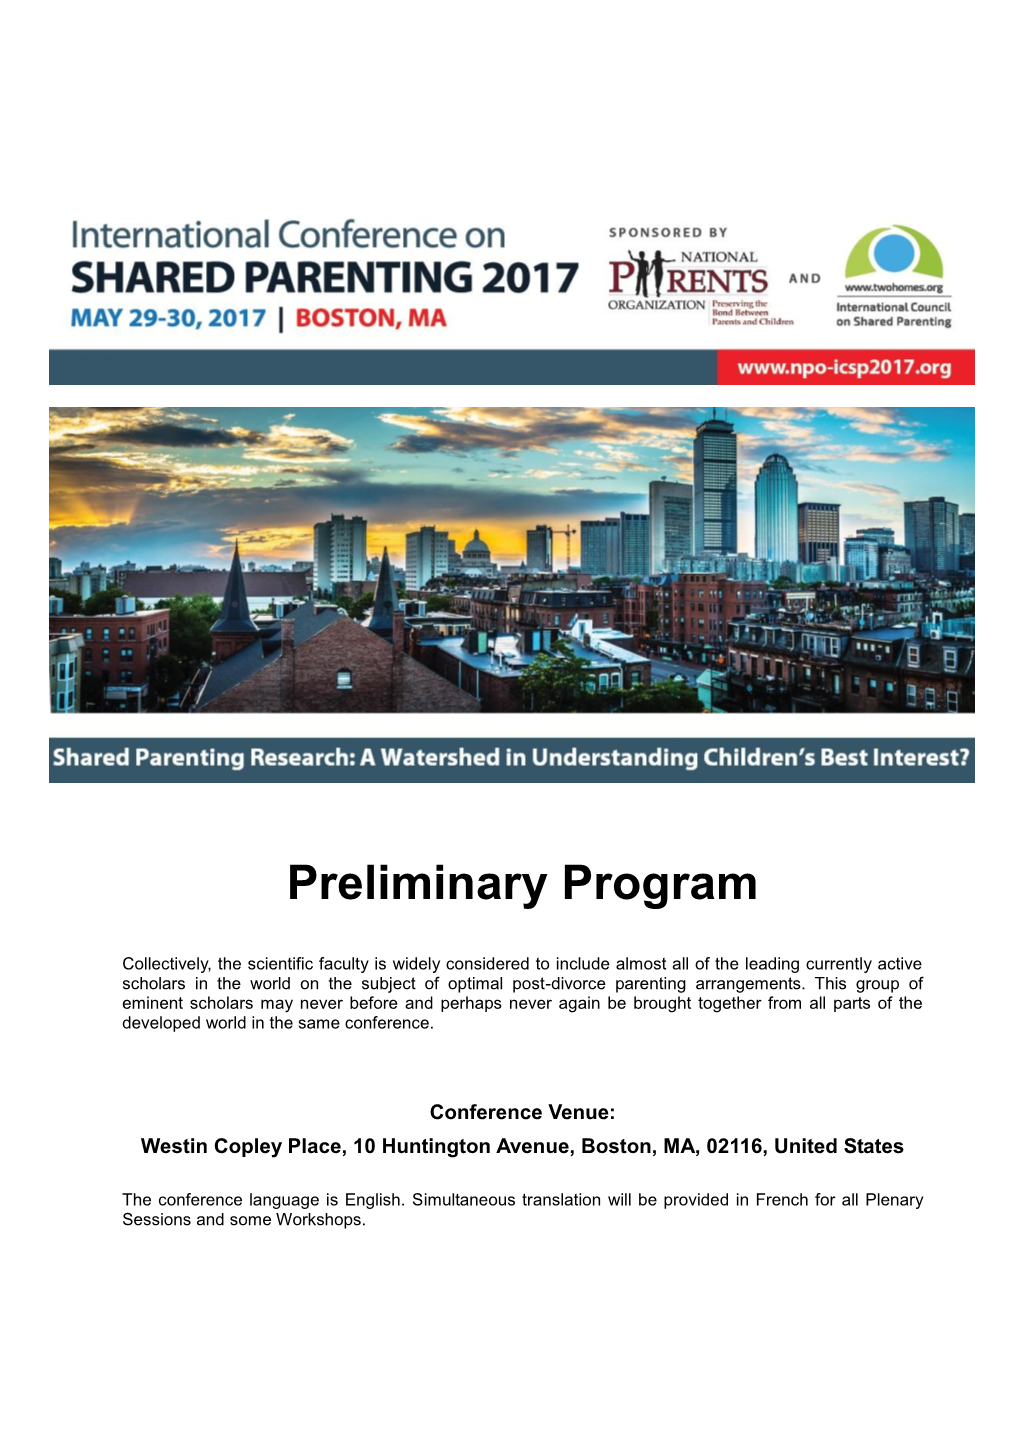 Program of the International Conference on Shared Parenting